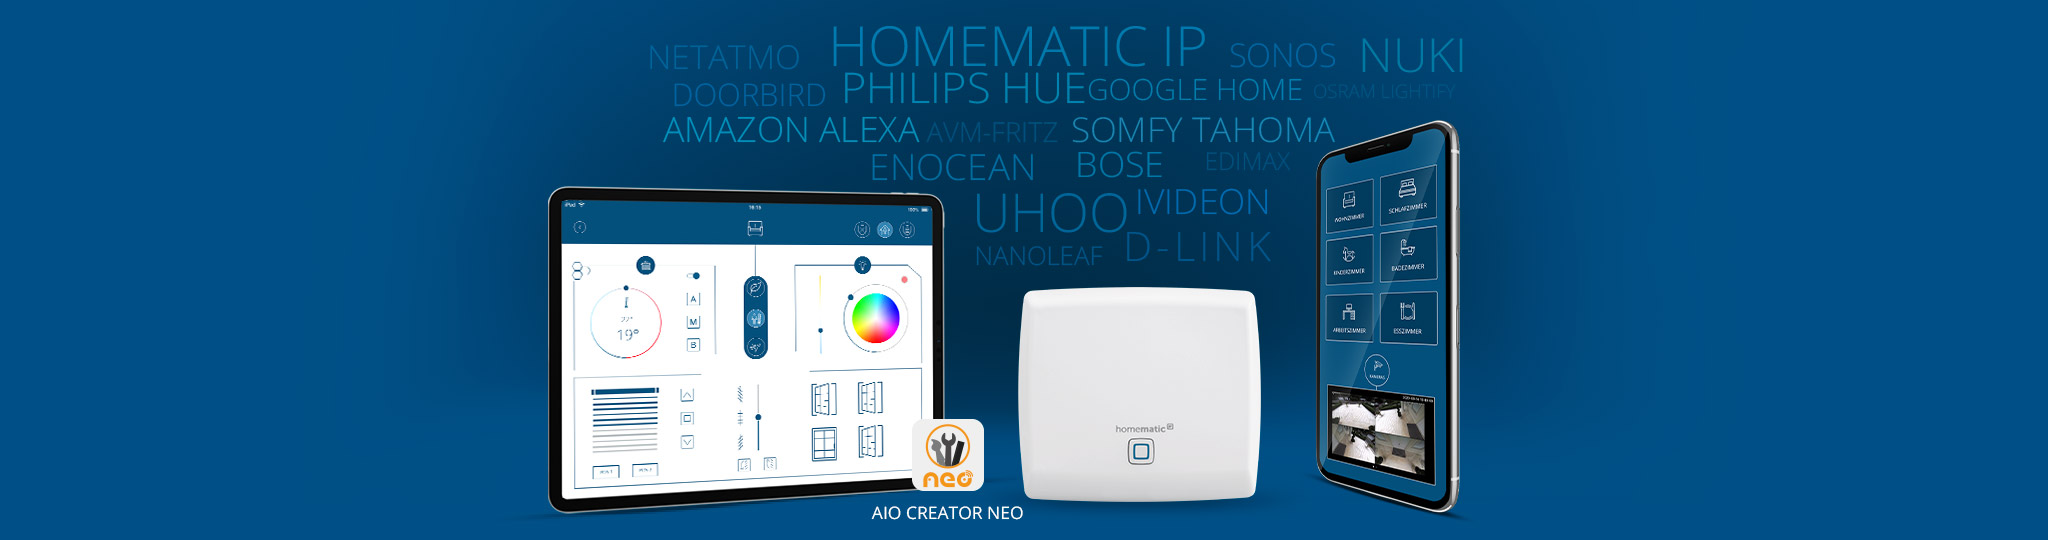 Homematic IP - Works with mediola